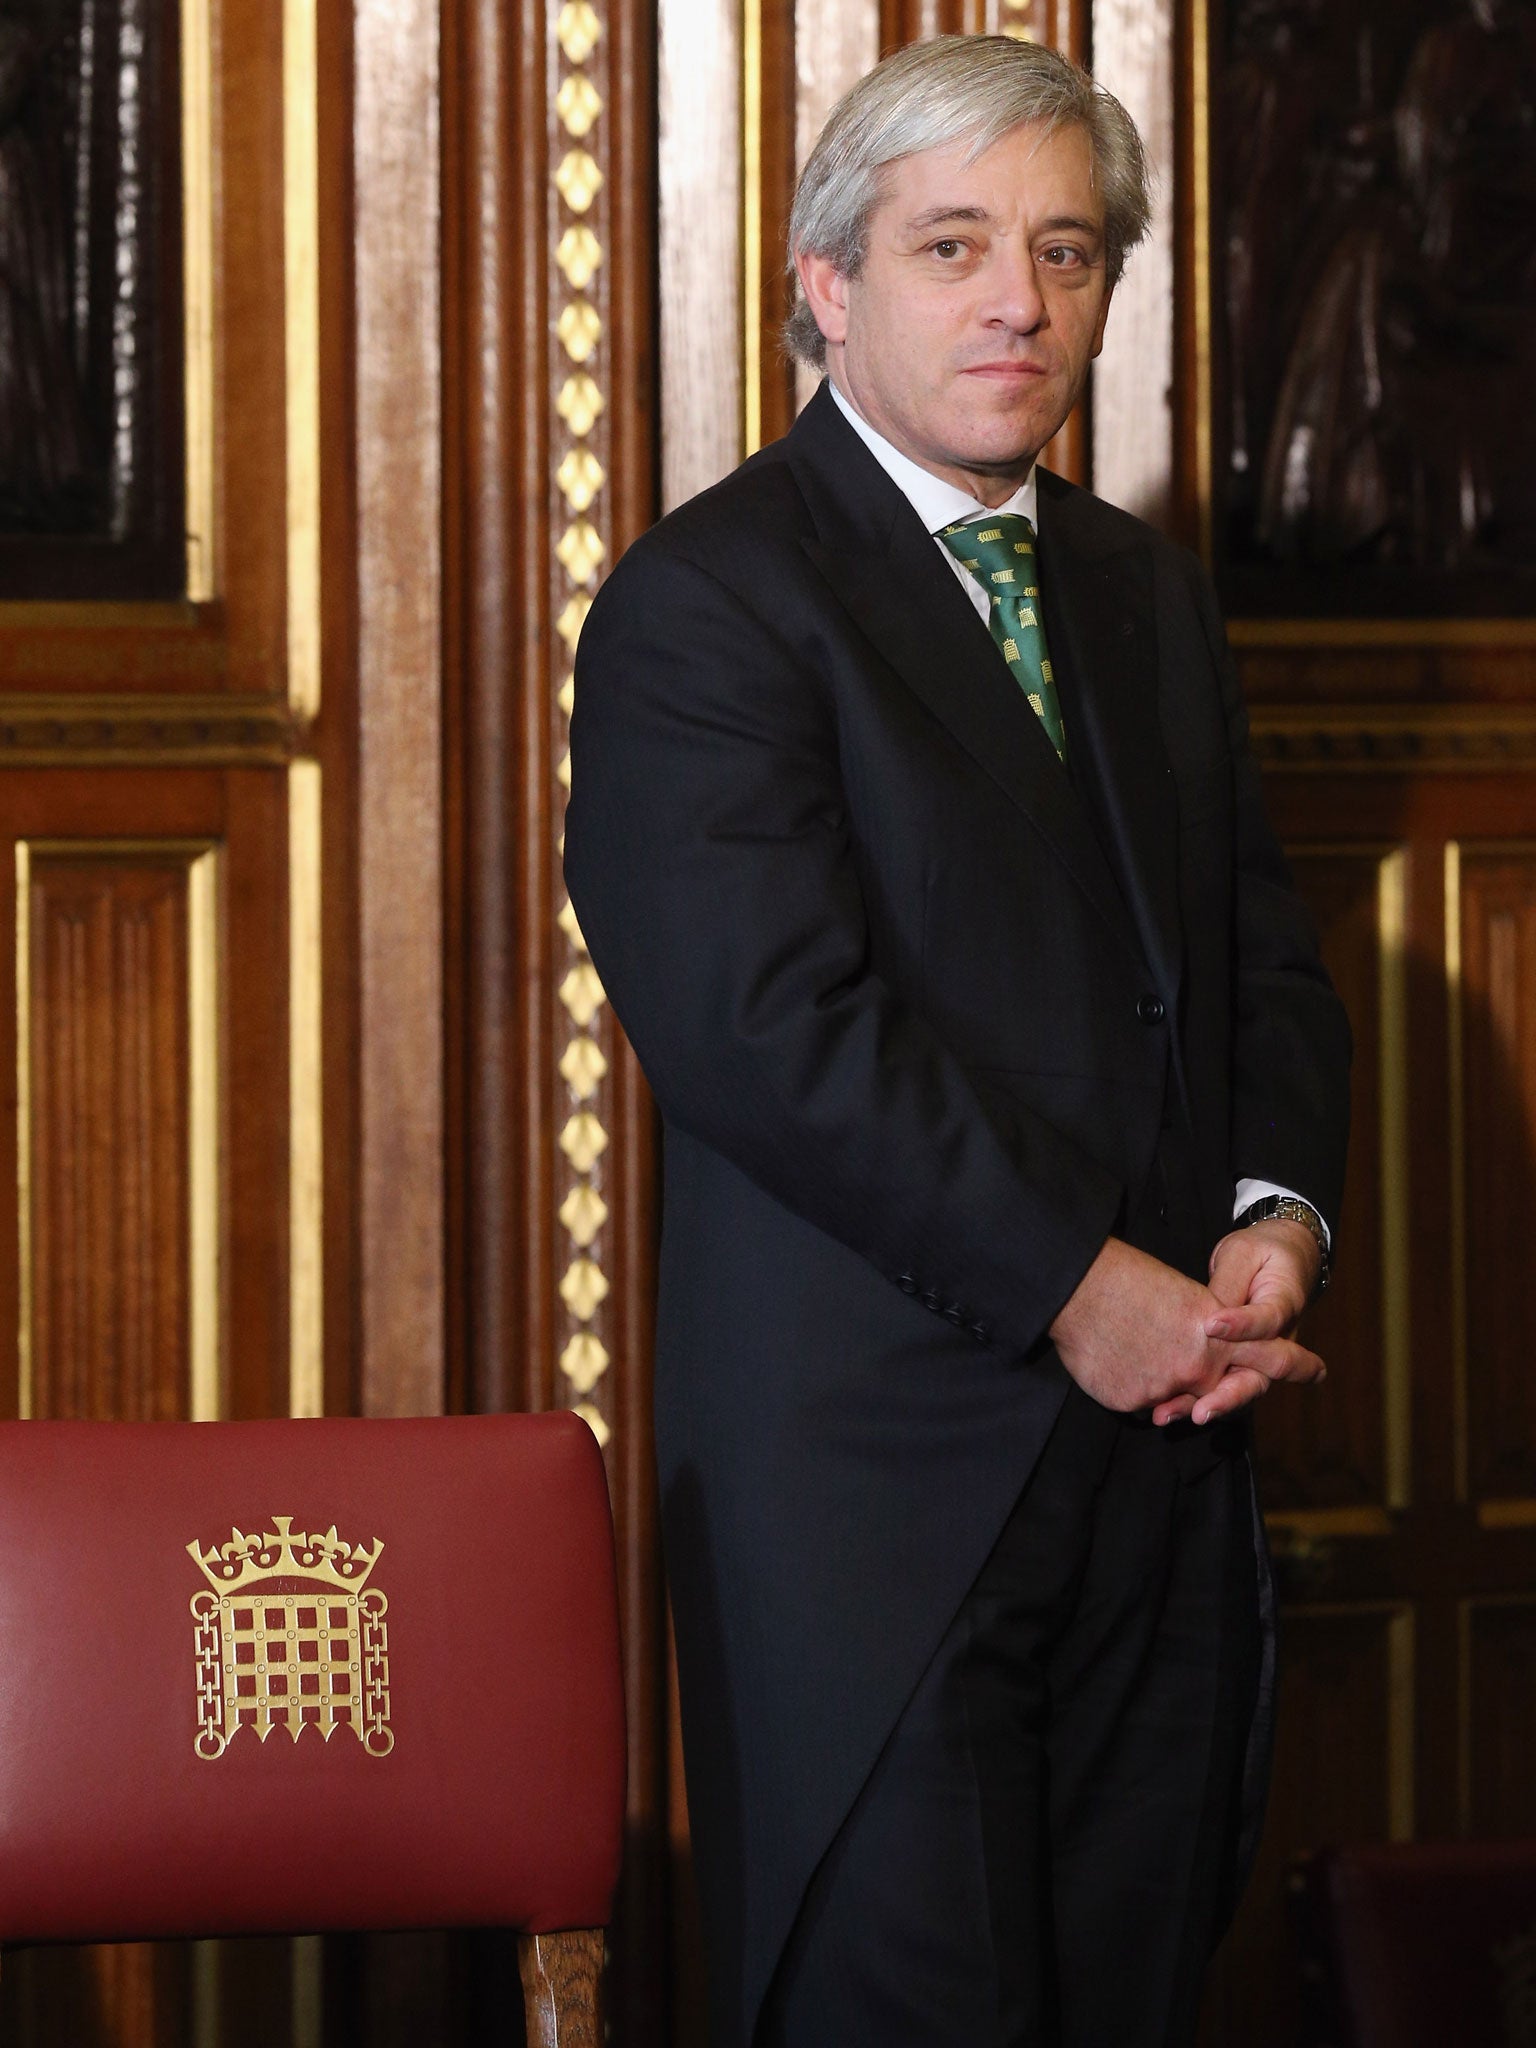 The Commons Speaker John Bercow has shown dissatisfaction with the way PMQs is conducted